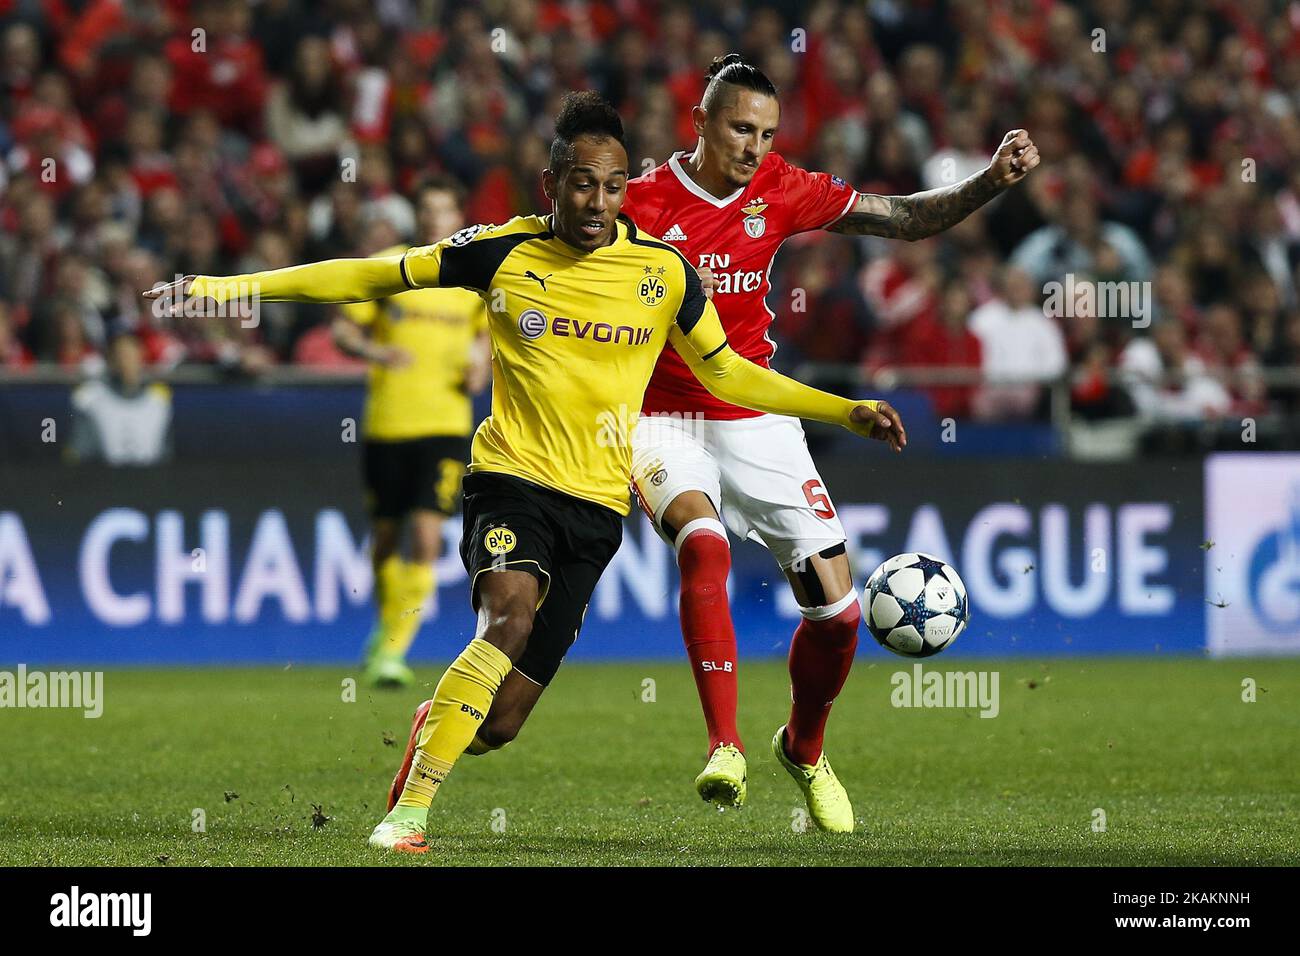 Dortmund's forward Aubameyang (L) vies for the ball with Benfica's midfielder Ljubomir Fejsa (R) during Champions League 2016/17 match between SL Benfica vs BVB Borussia Dortmund, in Lisbon, on February 14, 2017. (Photo by Carlos Palma/NurPhoto) *** Please Use Credit from Credit Field *** Stock Photo